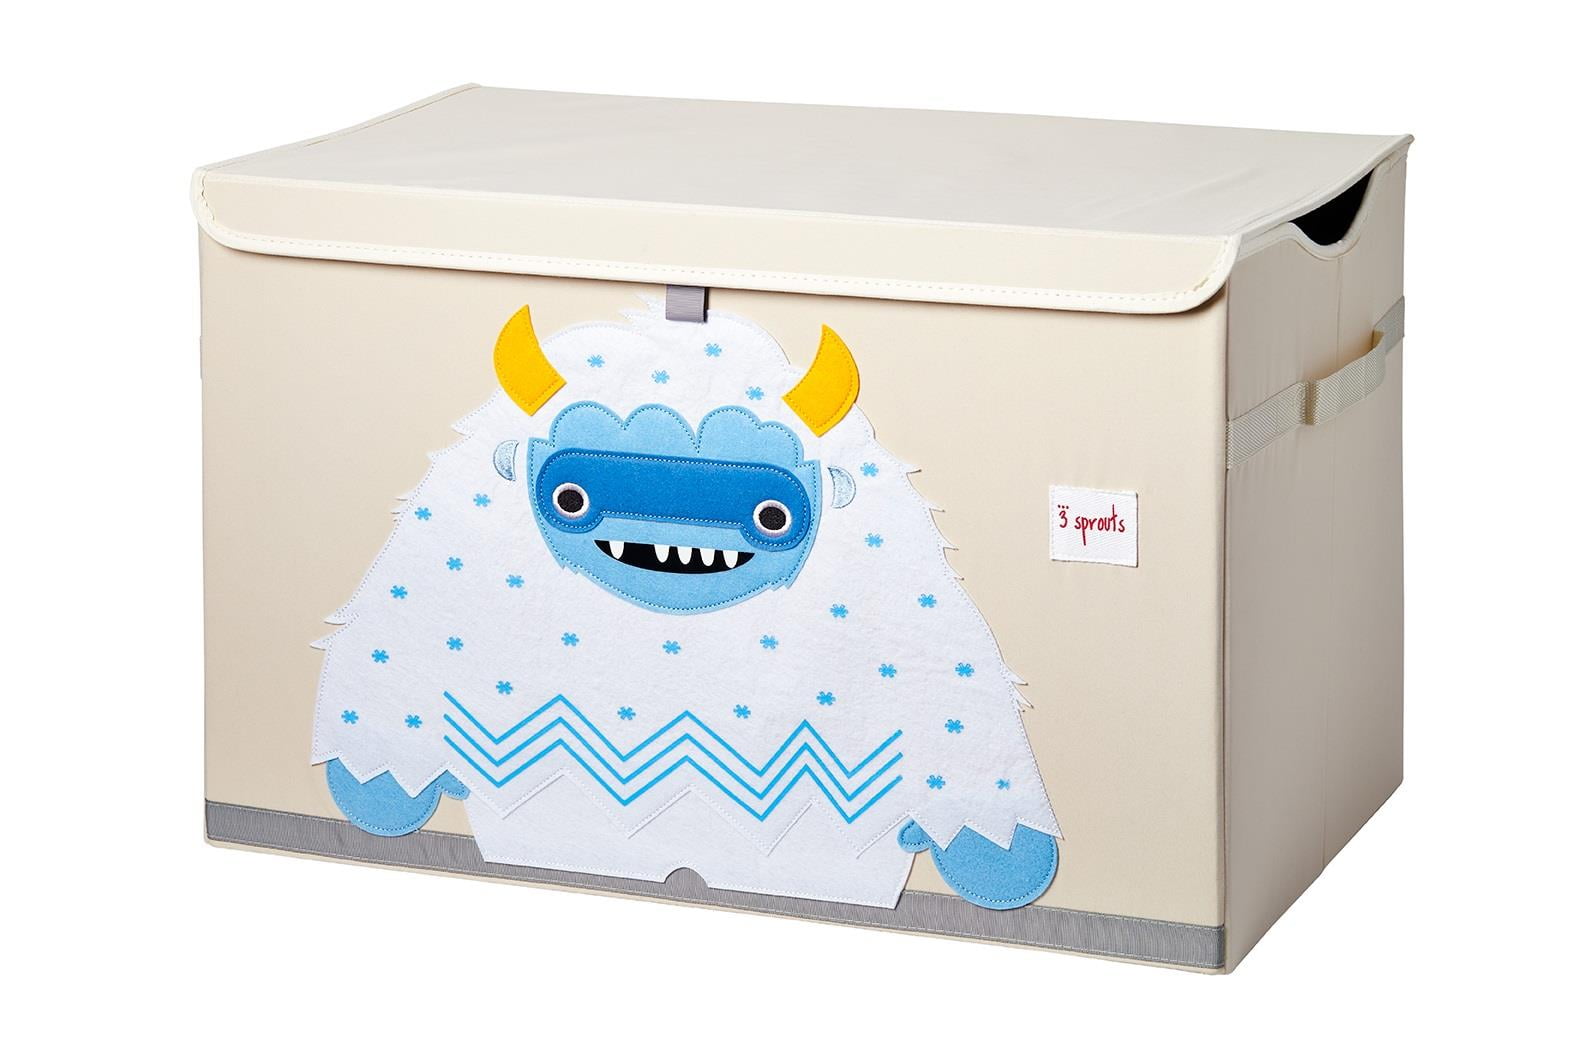 Storage Trunk for Boys and Girls Room 3 Sprouts Kids Toy Chest 